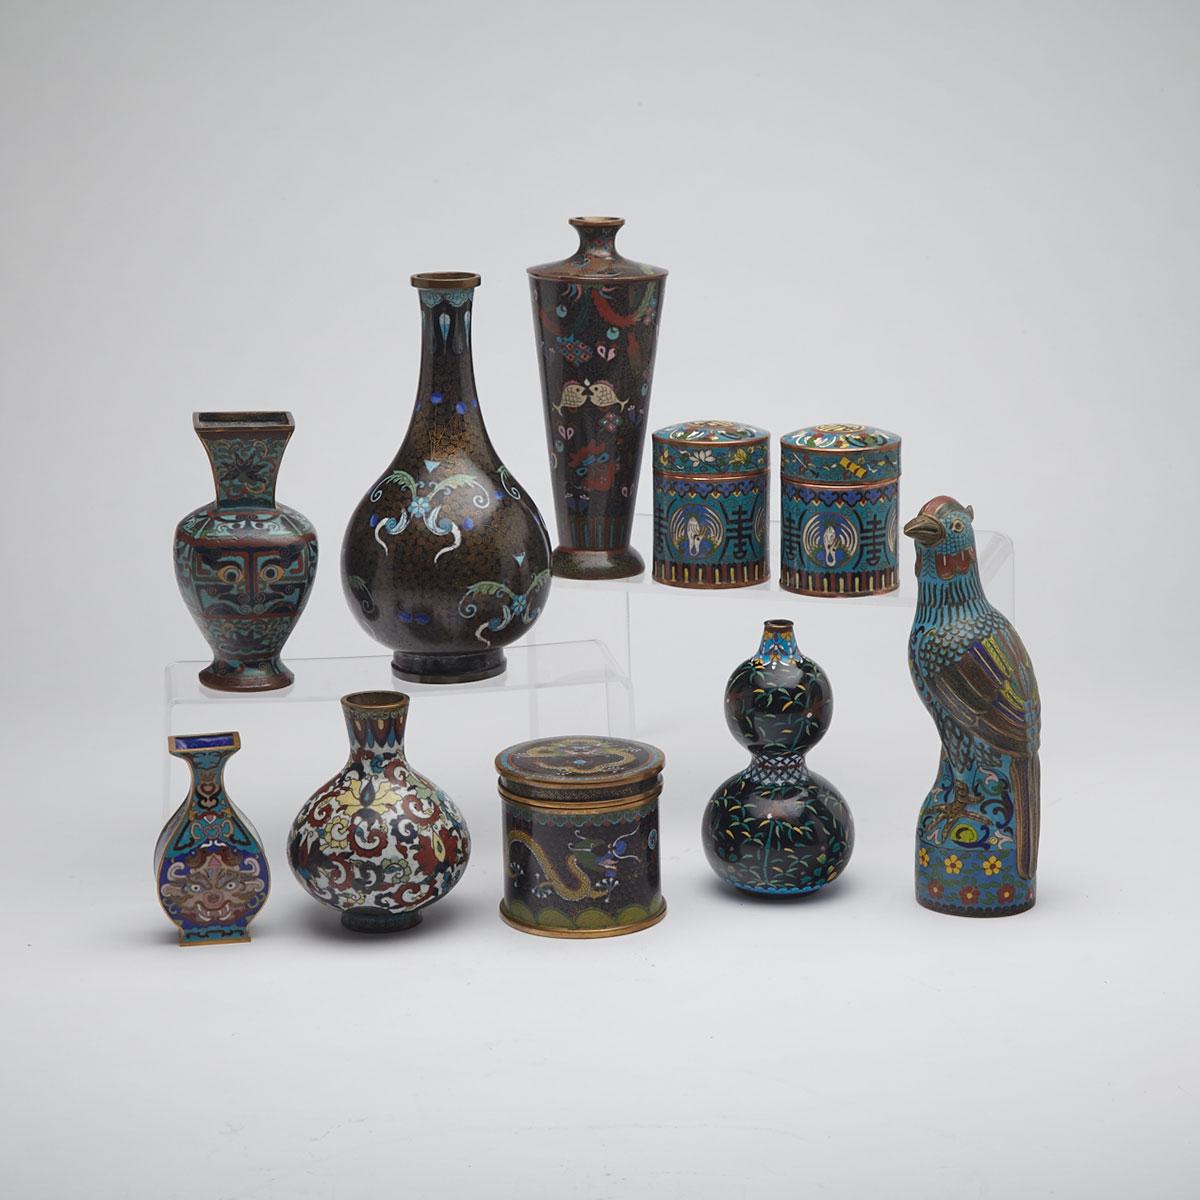 Group of Ten Cloisonné Enamel Vessels, China and Japan, First-Half 20th Century